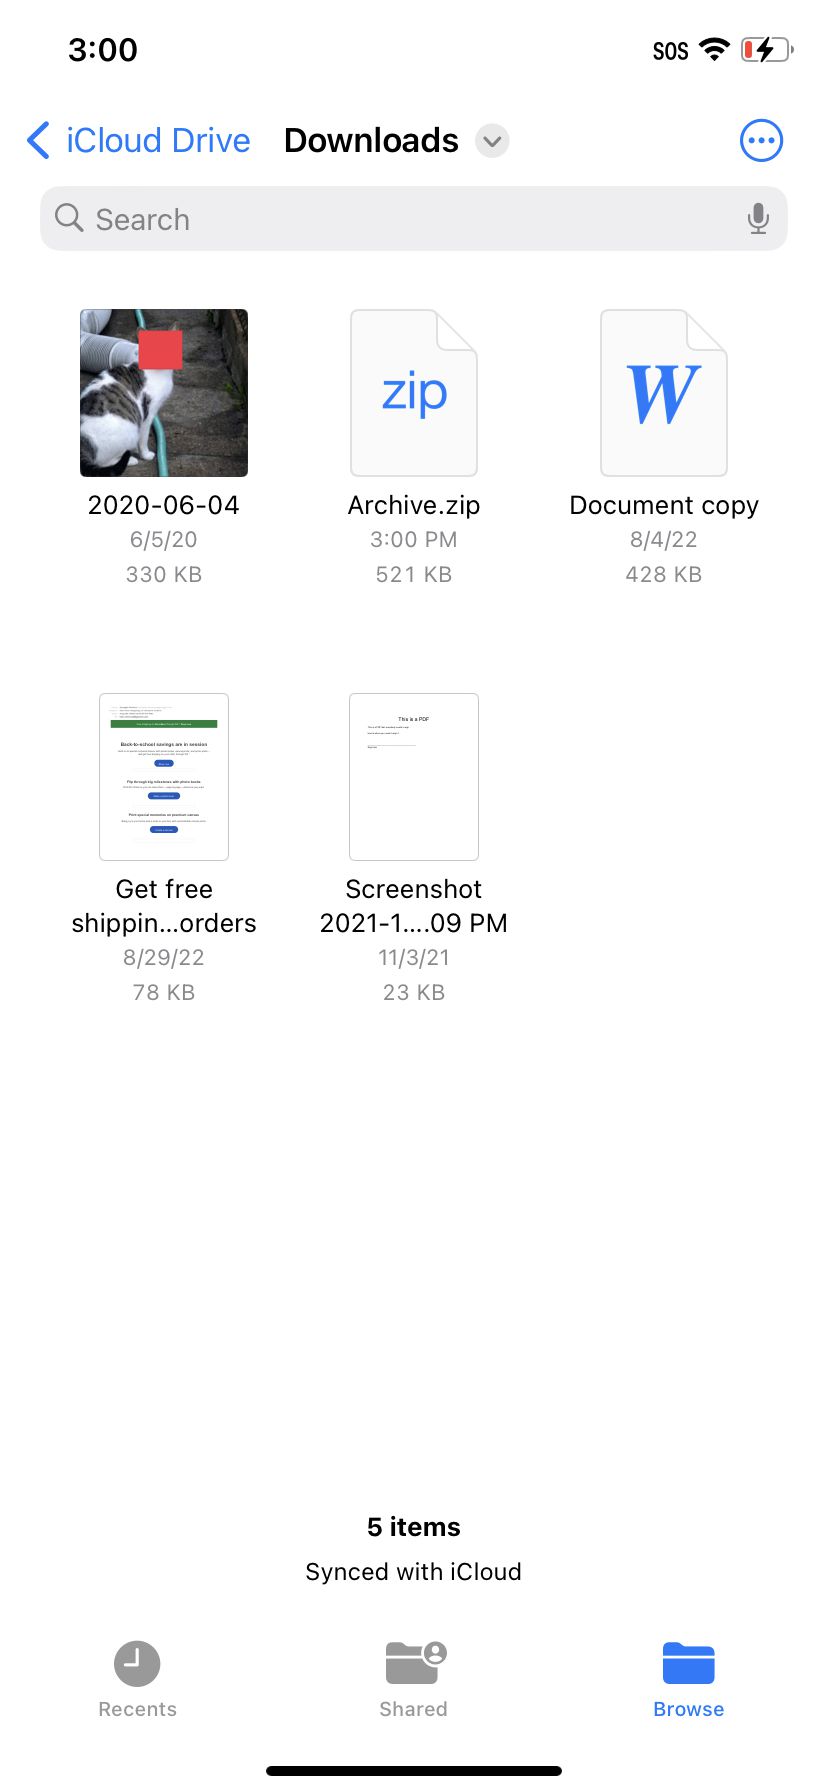 The same four files as before, with another labeled Archive.zip.